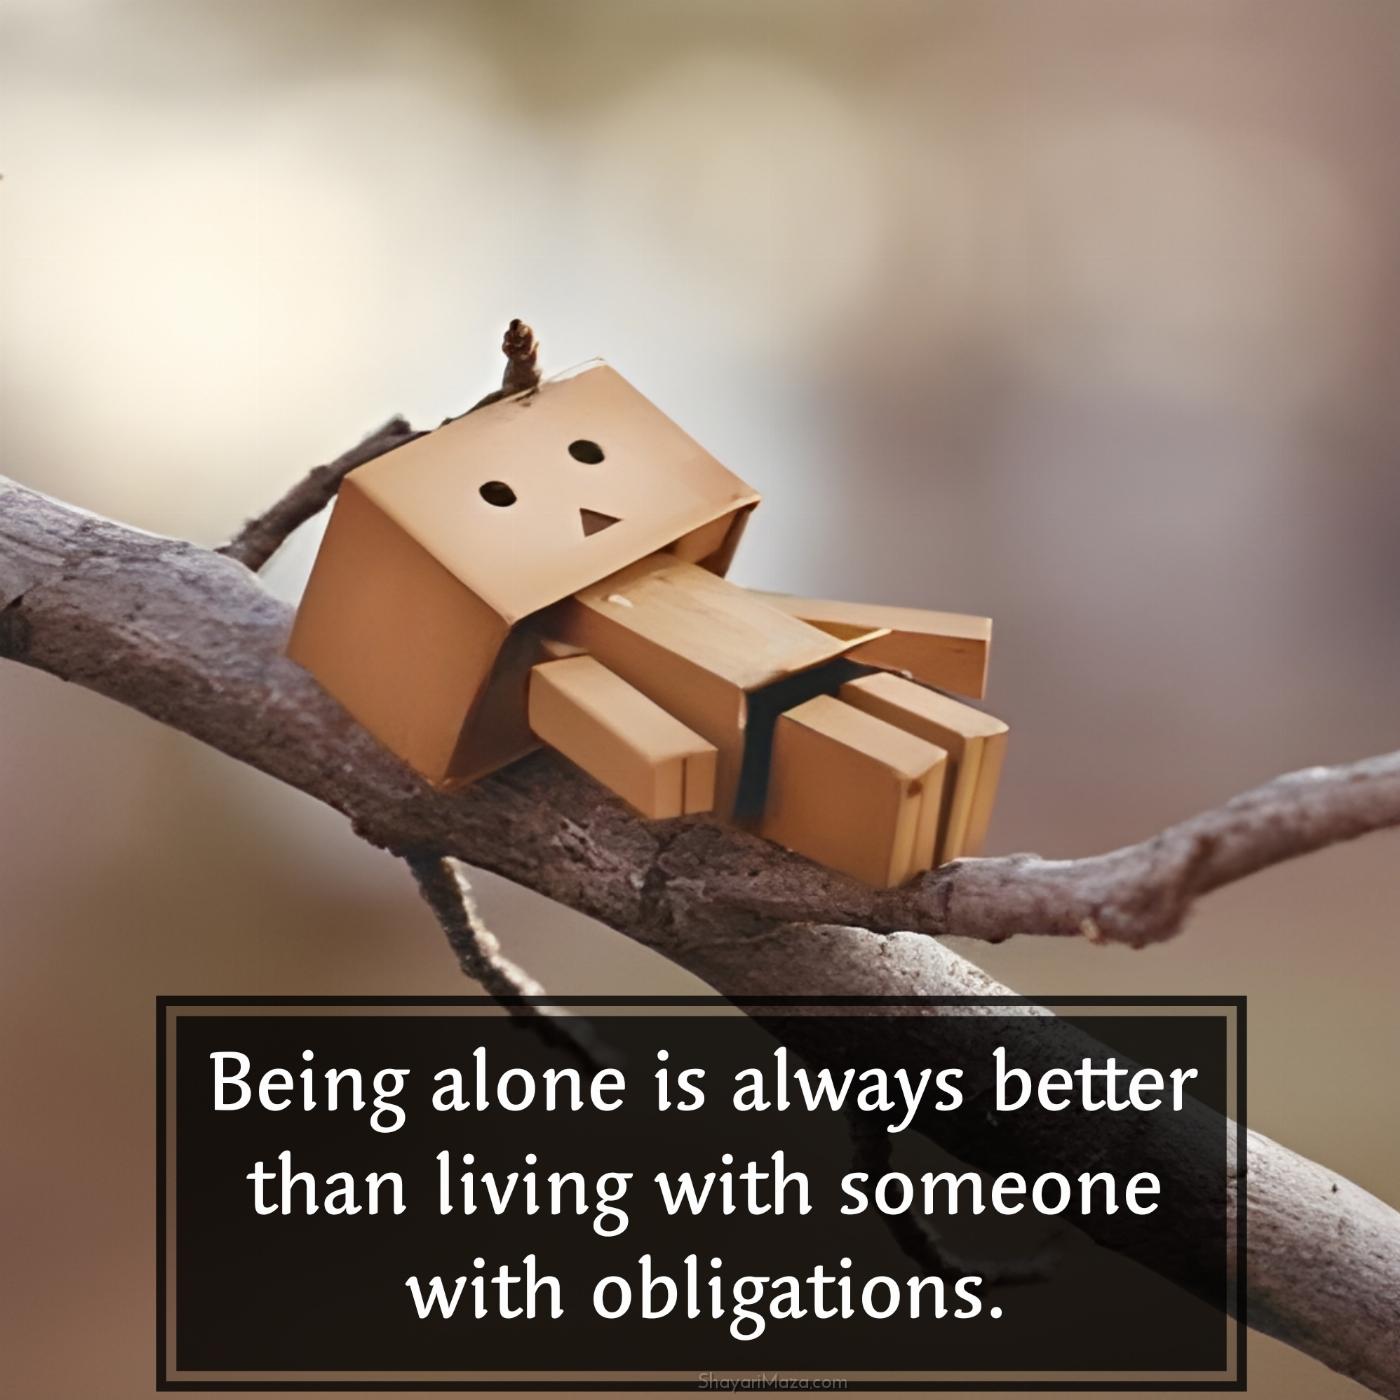 Being alone is always better than living with someone